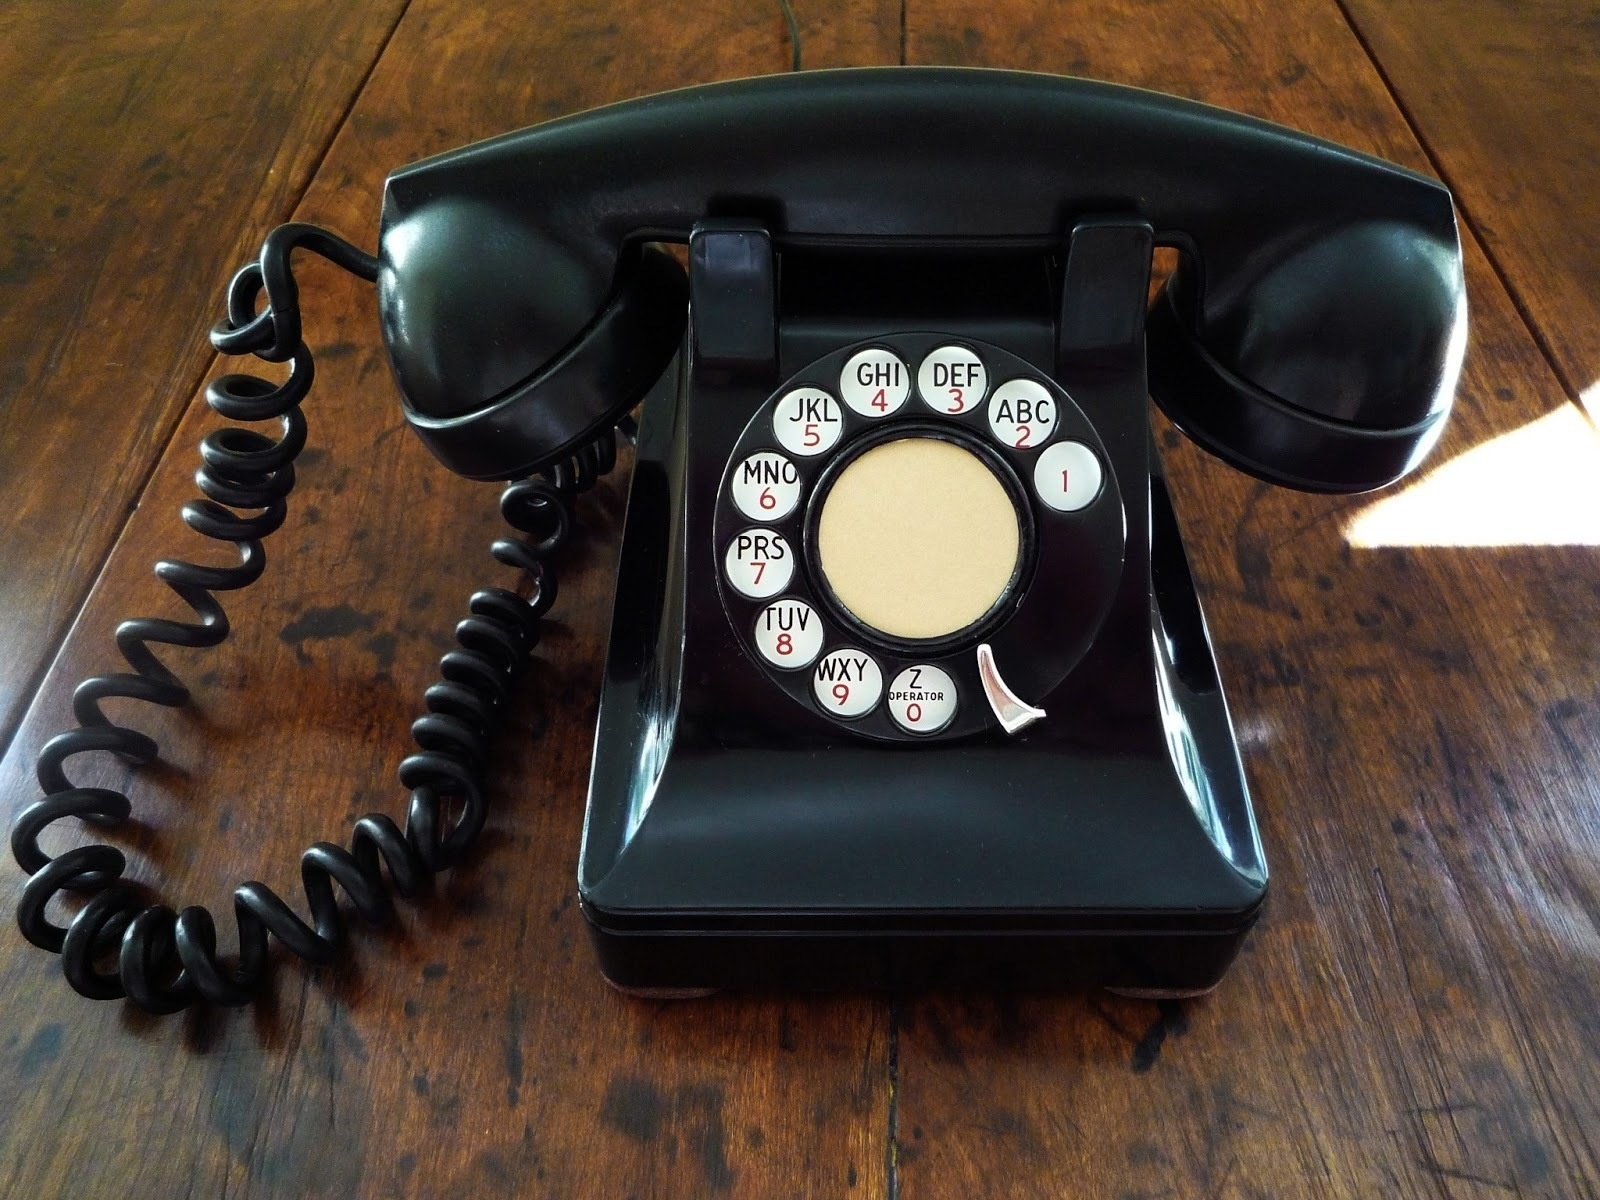 The rotary telephone was invention in the early 1900s.